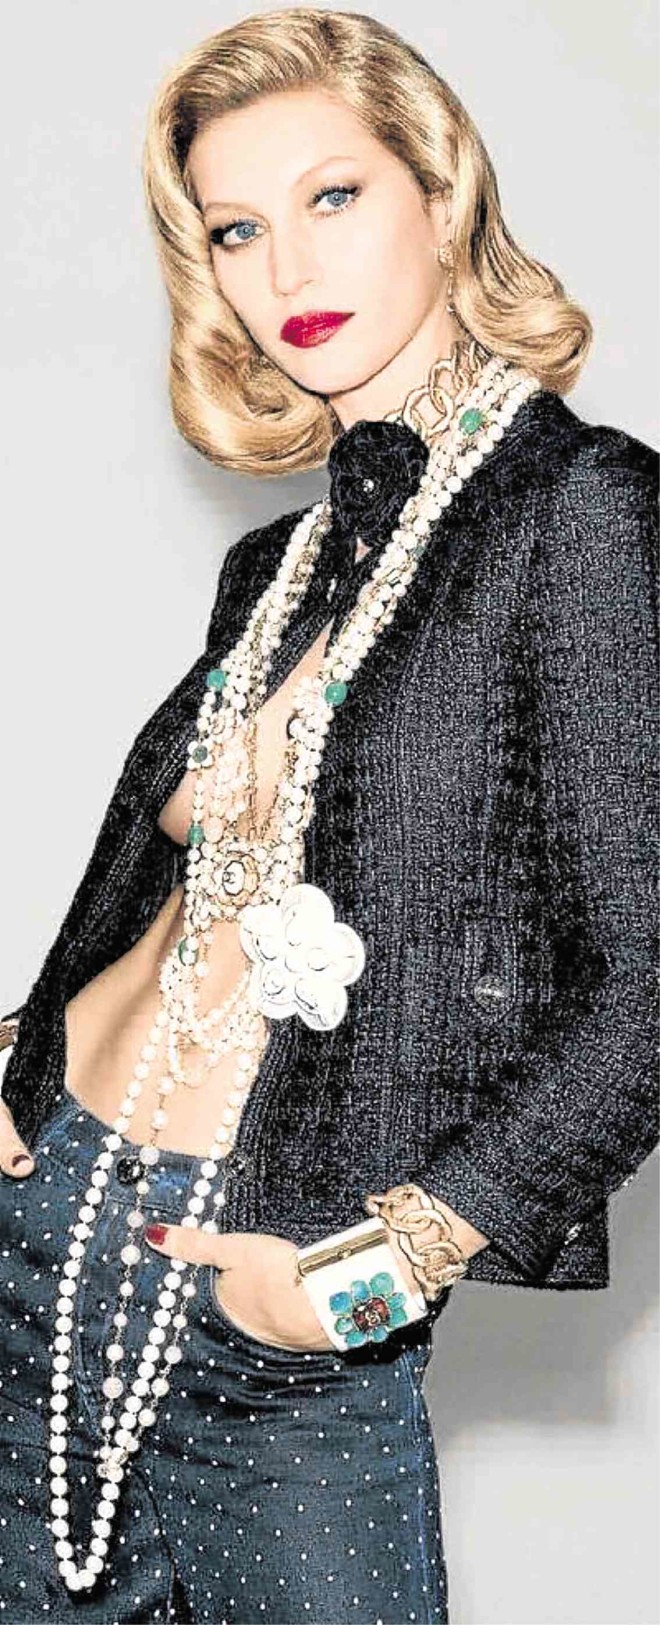 Chanel style. Itwas founder Mademoiselle Gabrielle “Coco” Chanel who piled on fake and real jewelry together.